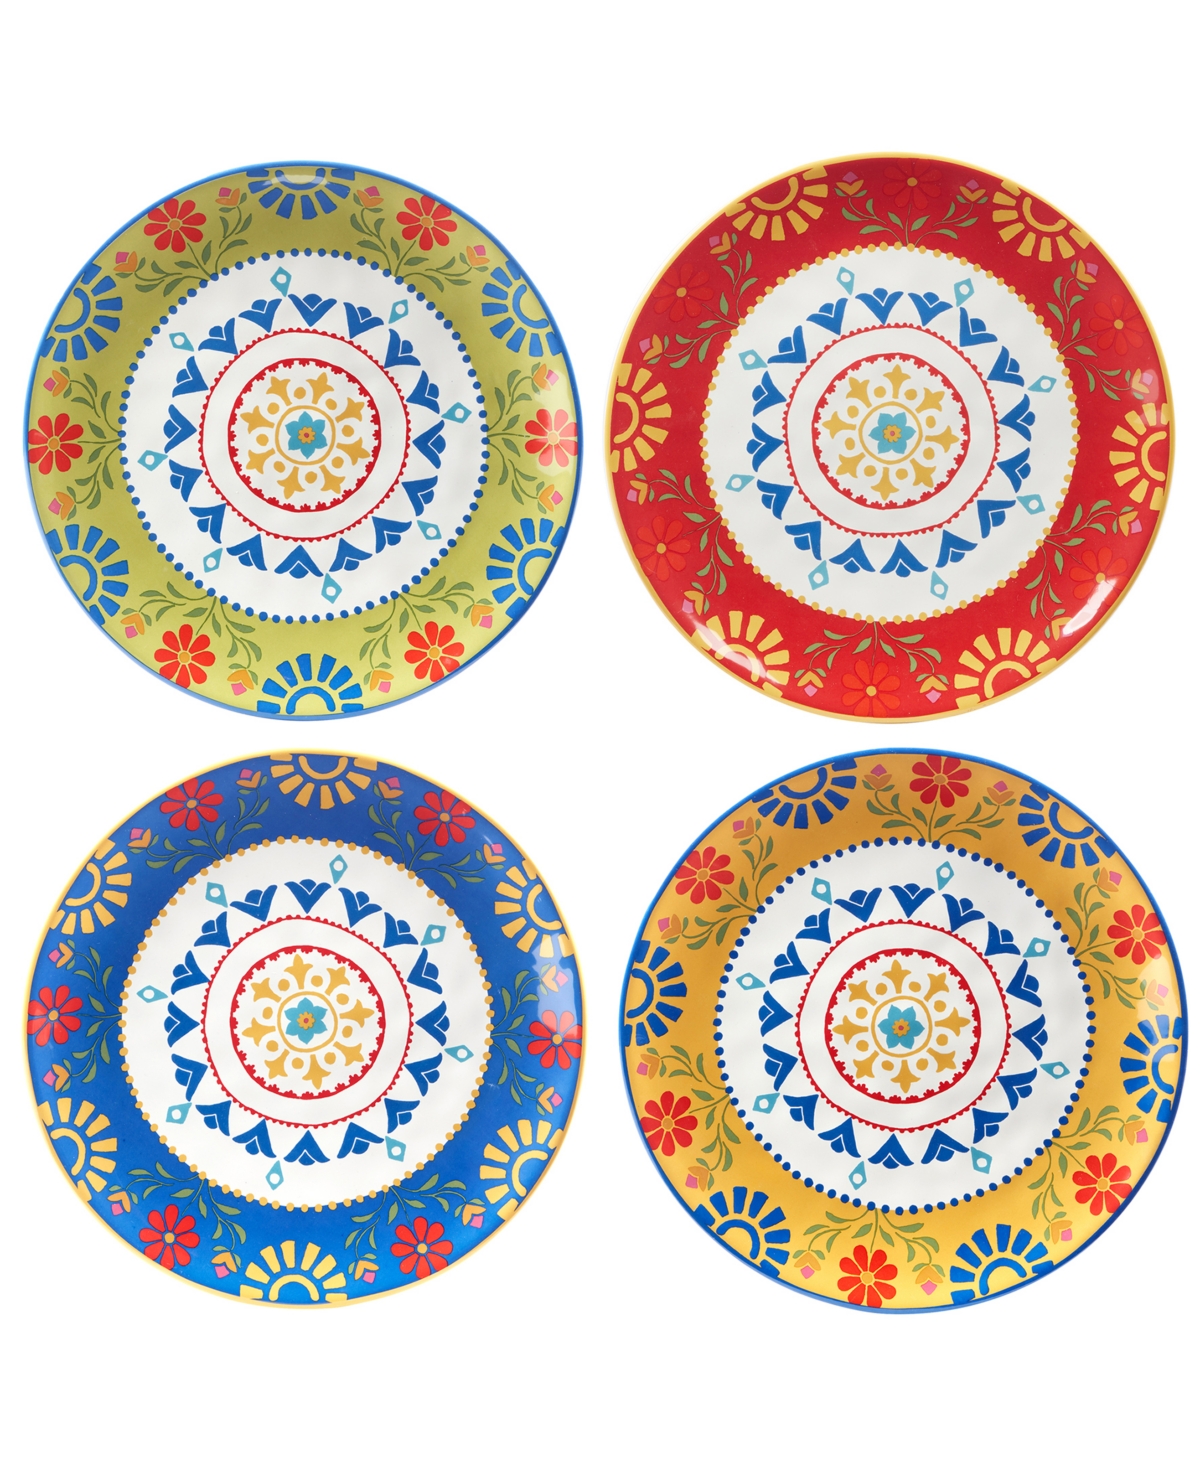 Spice Love Dinner Plates Set of 4 - Miscellaneous